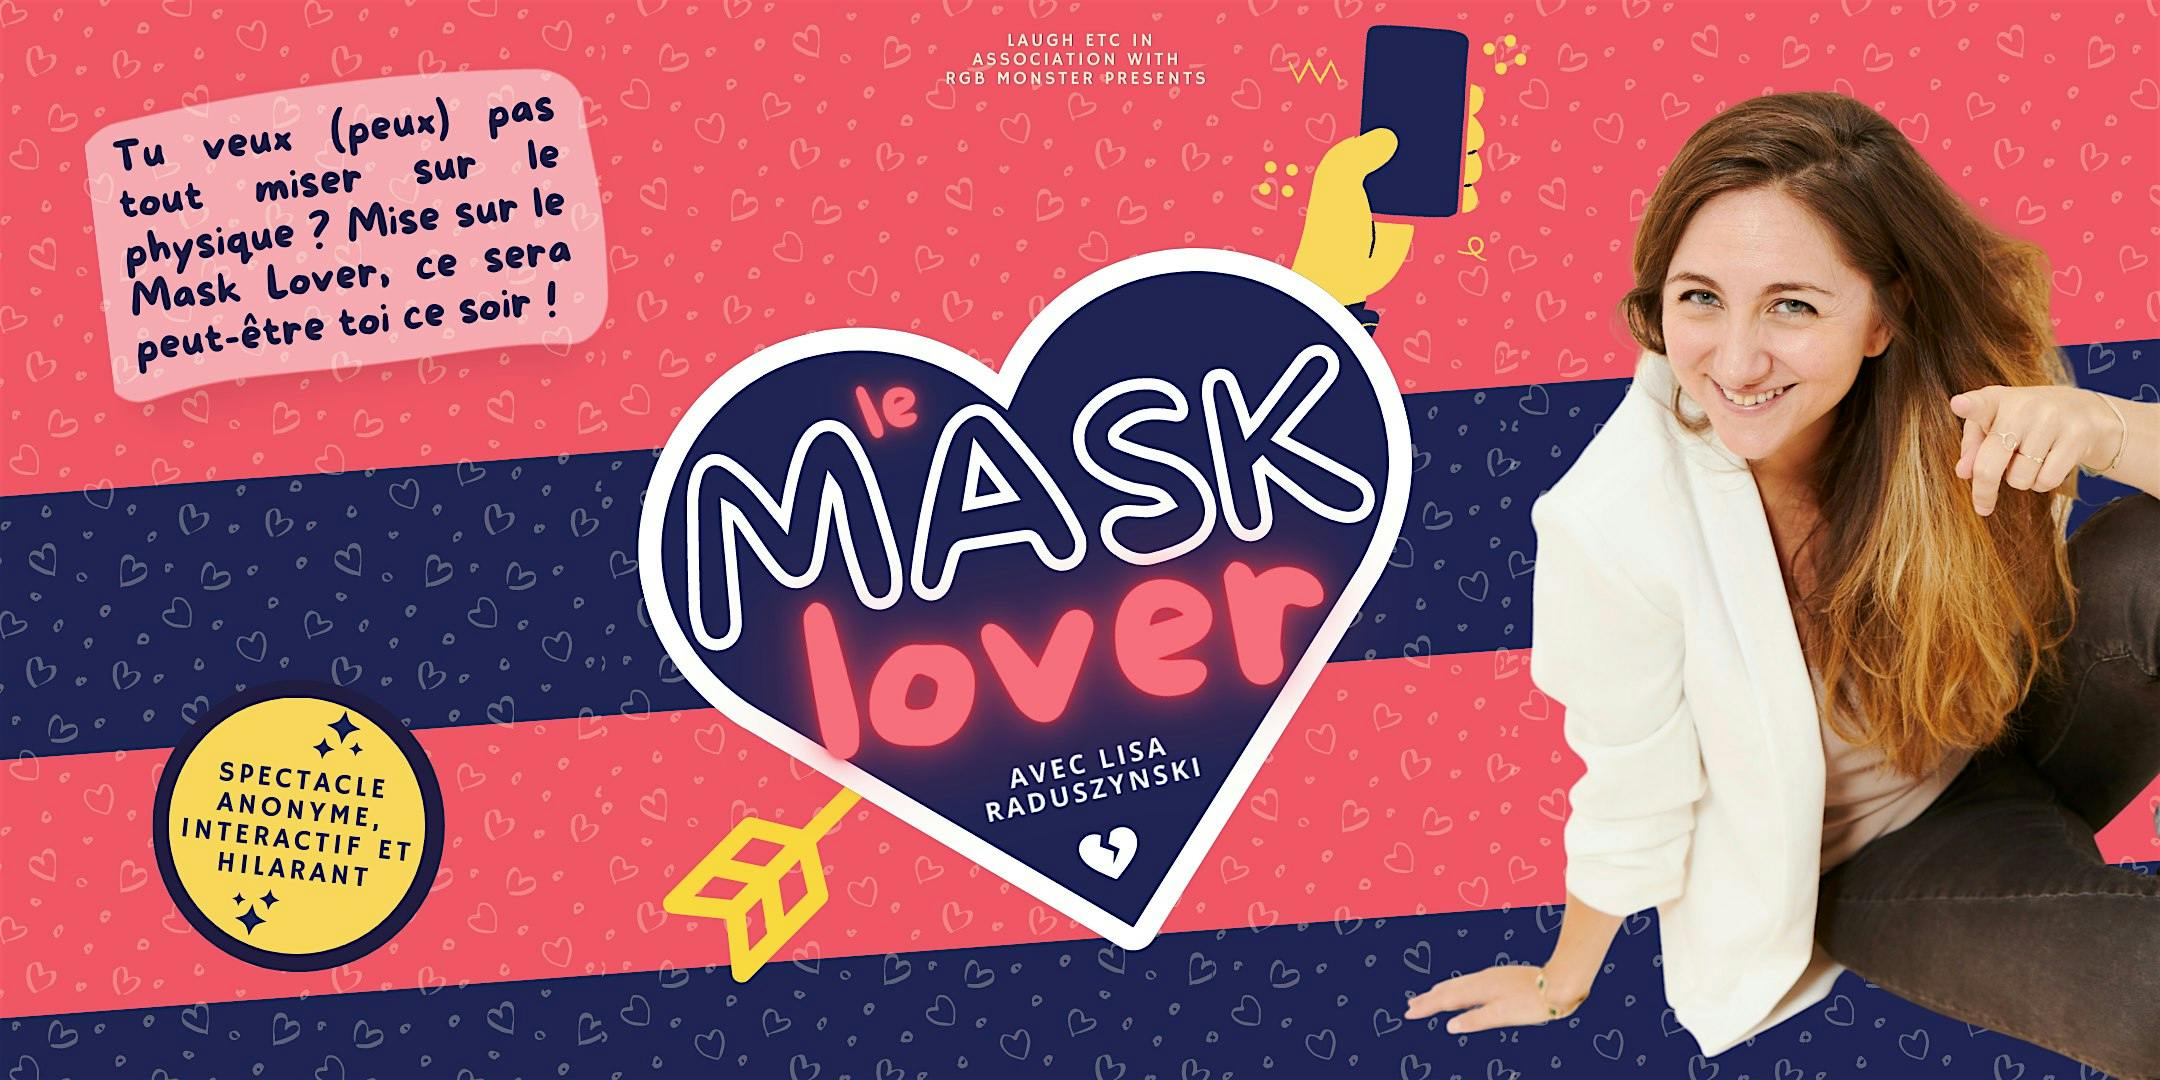 Mask Lover - Spectacle interactif,  anonyme et hilarant ! logo